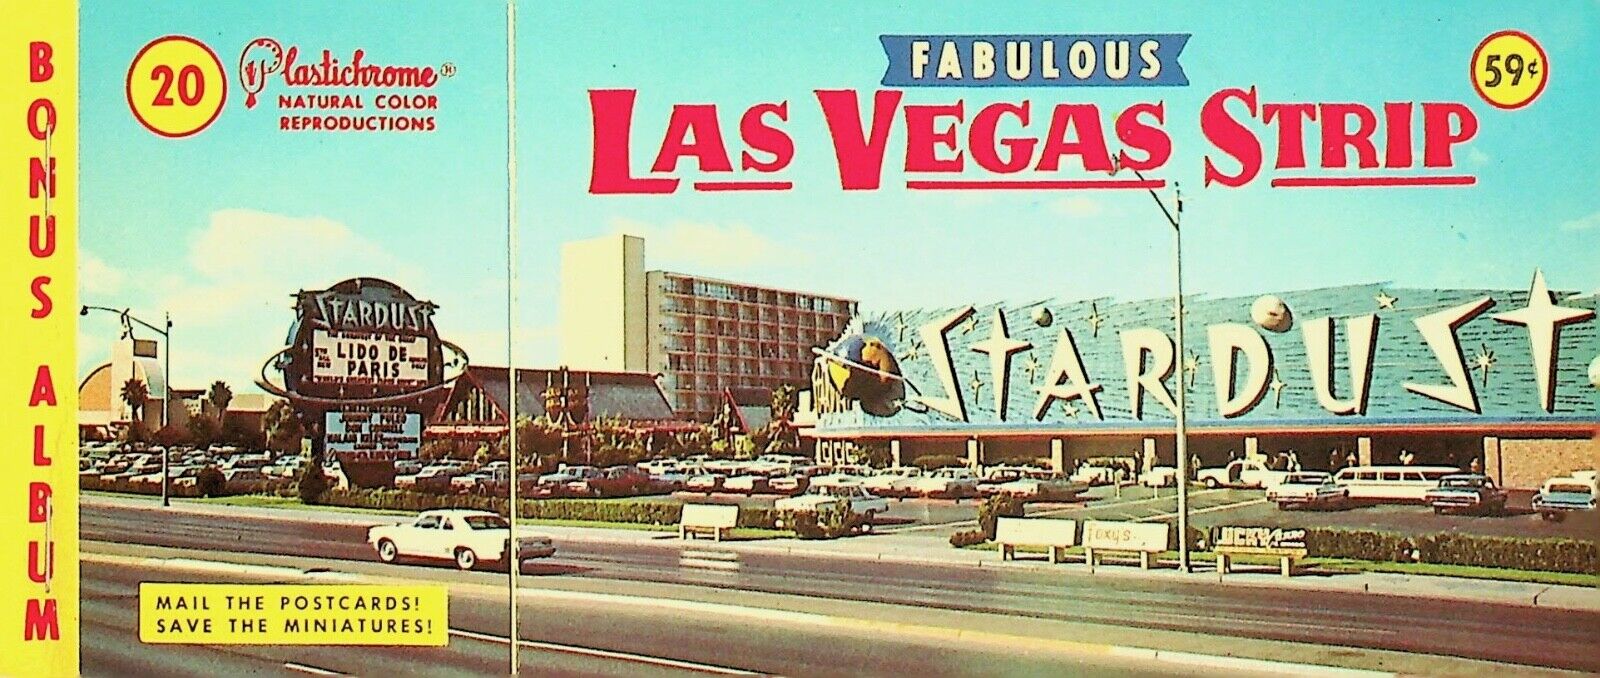 THE FABULOUS LAS VEGAS NEVADA POSTCARD FOLD OUT BOOKLET SEE NOTES - E14-G